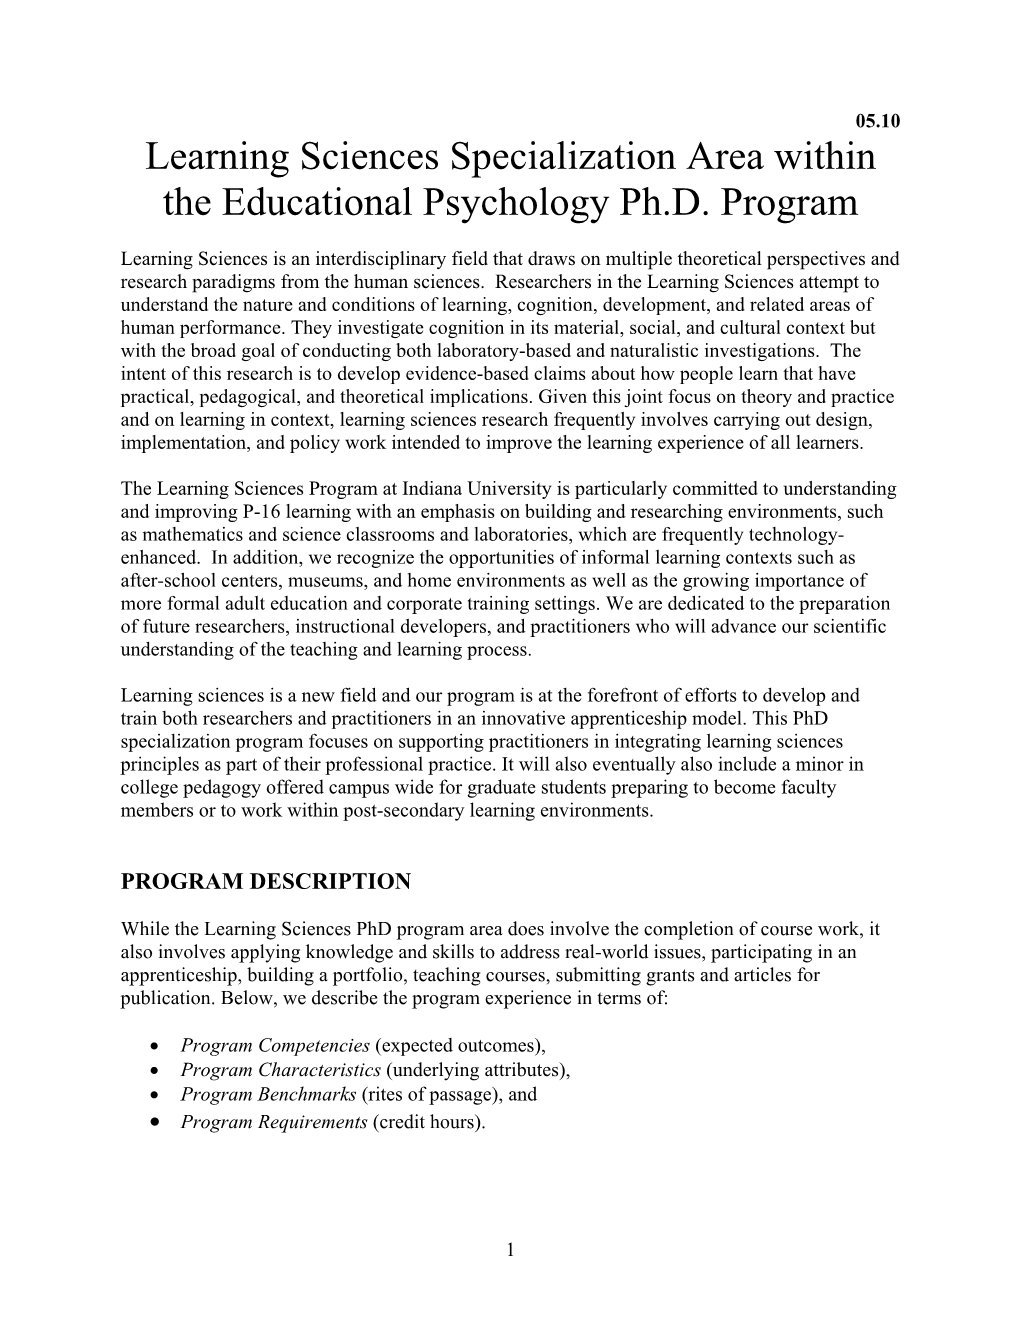 Learning Sciences Specialization Area Within the Educational Psychology Ph.D